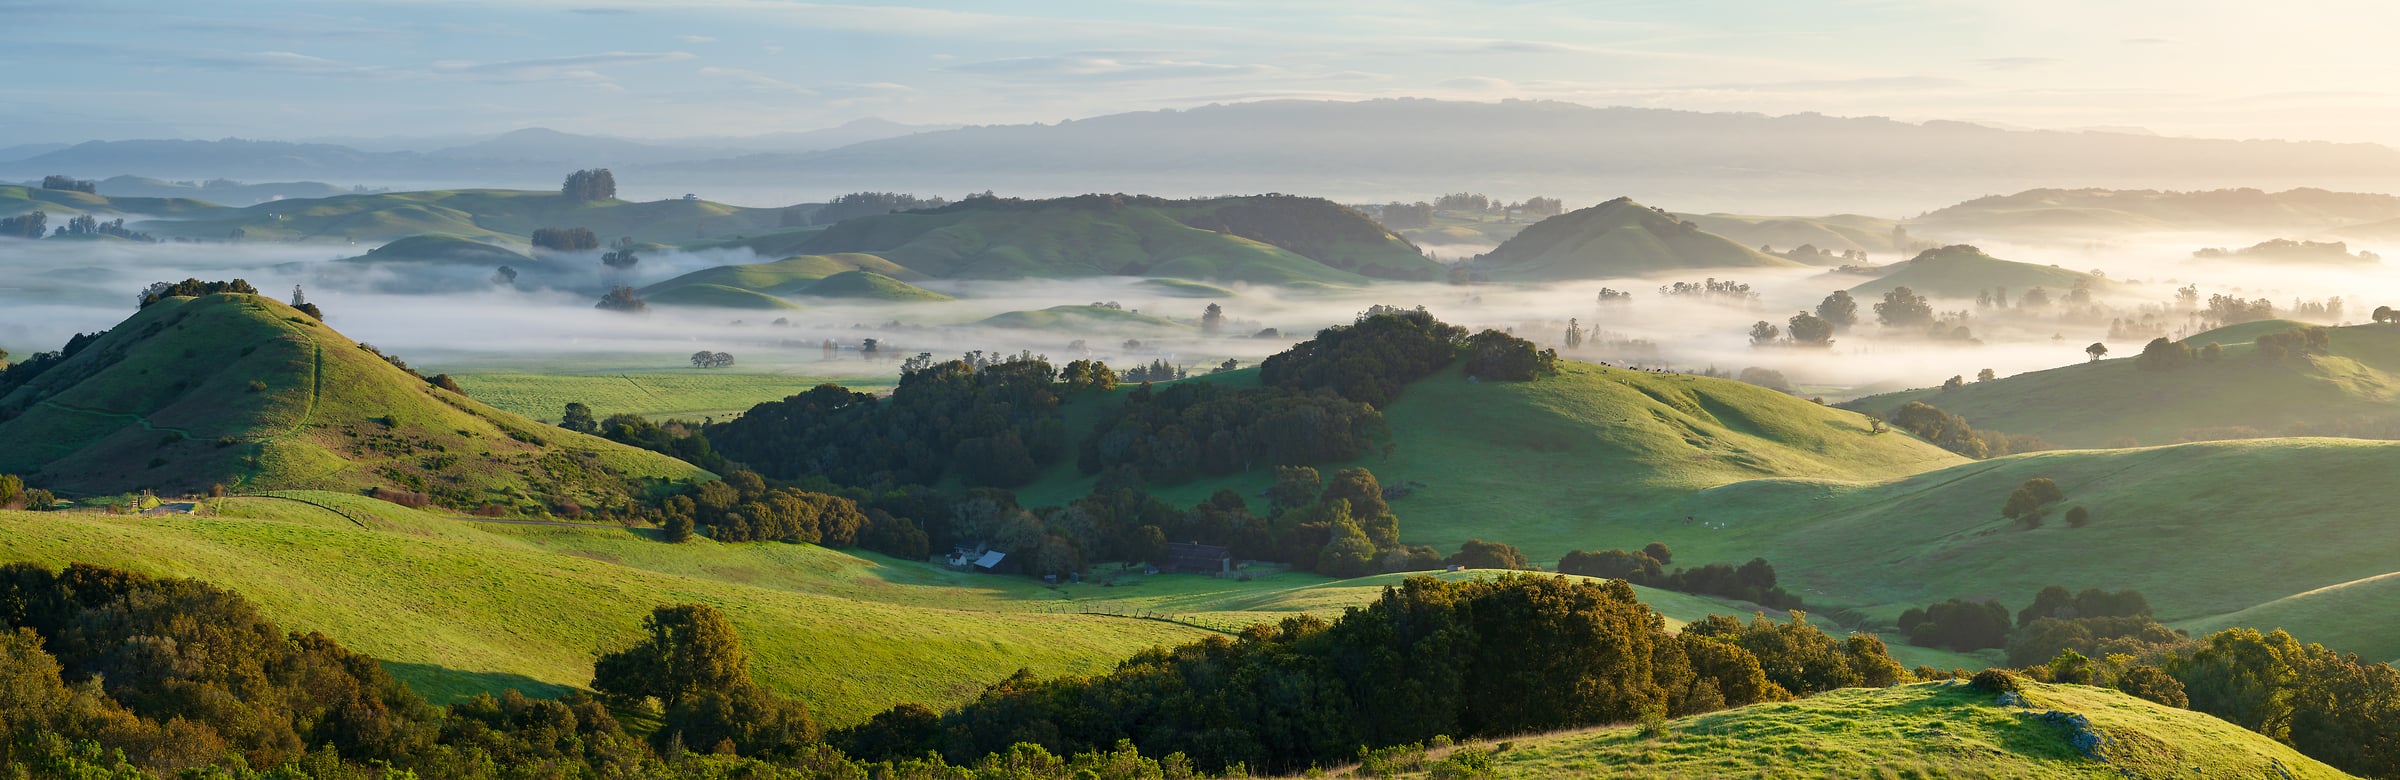 349 megapixels! A very high resolution, large-format VAST photo print of beautiful rolling green hills of grass with a few trees and fog in the valleys of the hills; landscape photograph of spring created by Jeff Lewis in Marin and Sonoma County, California.